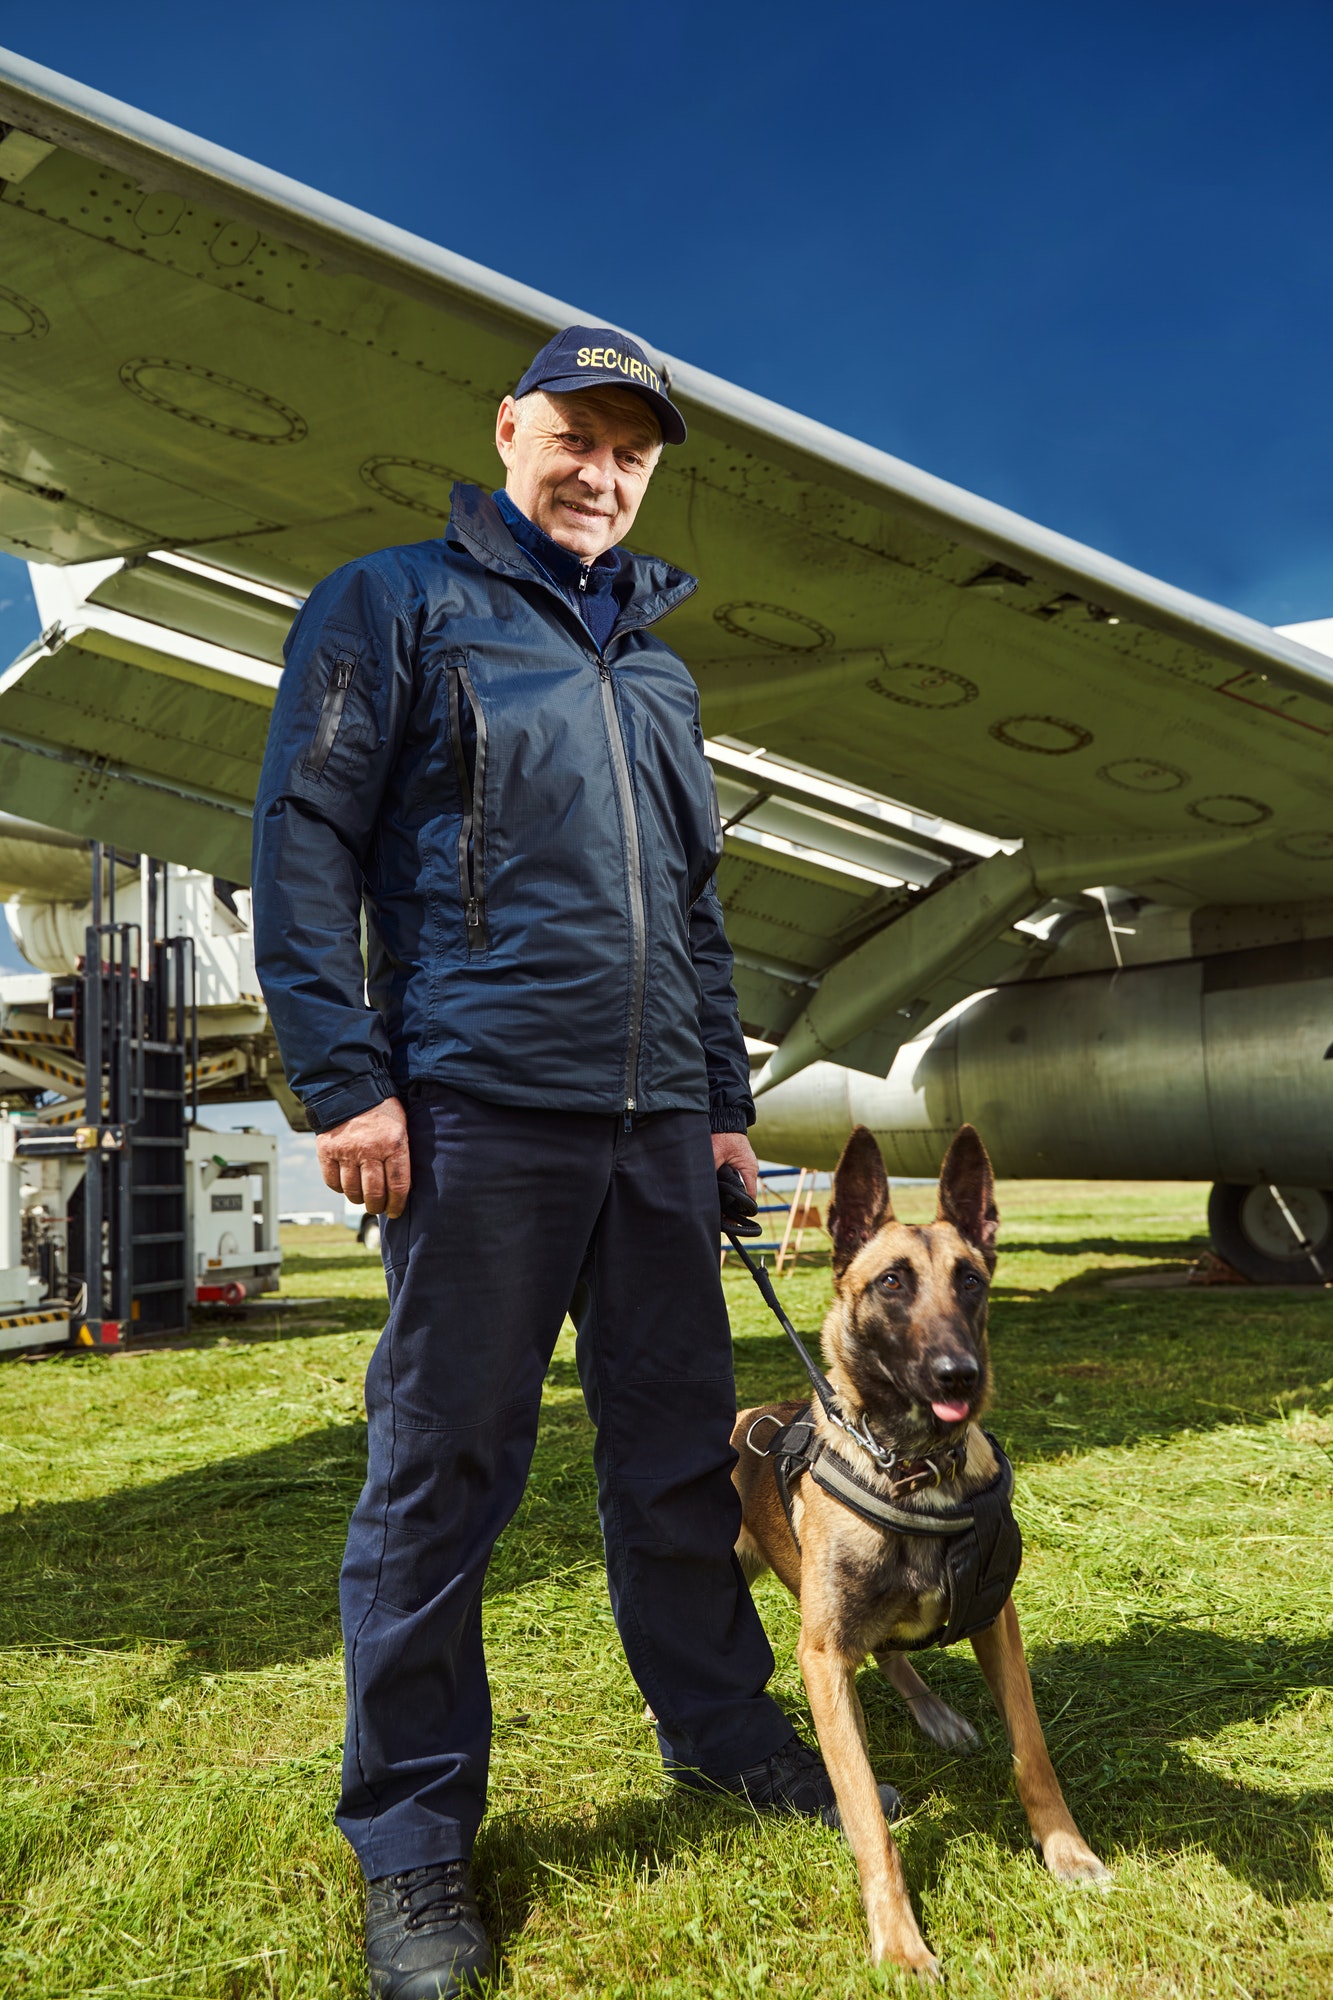 Security officer with dog standing near plane at aerodrome